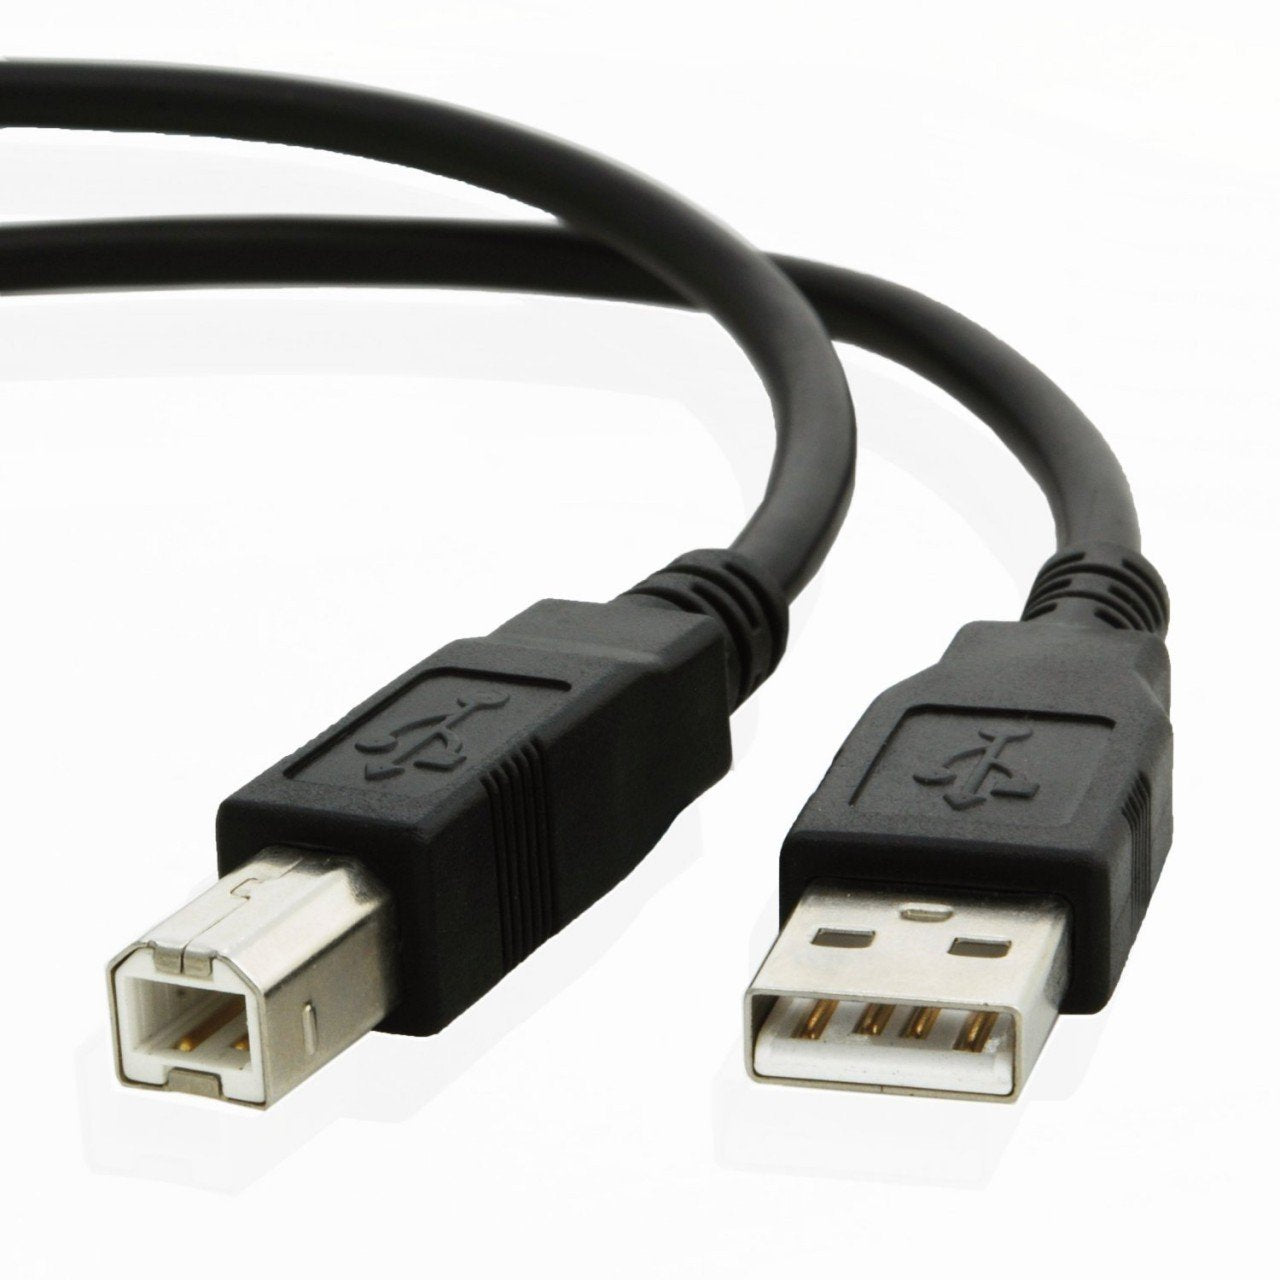 USB cable for Canon PIXMA G4200